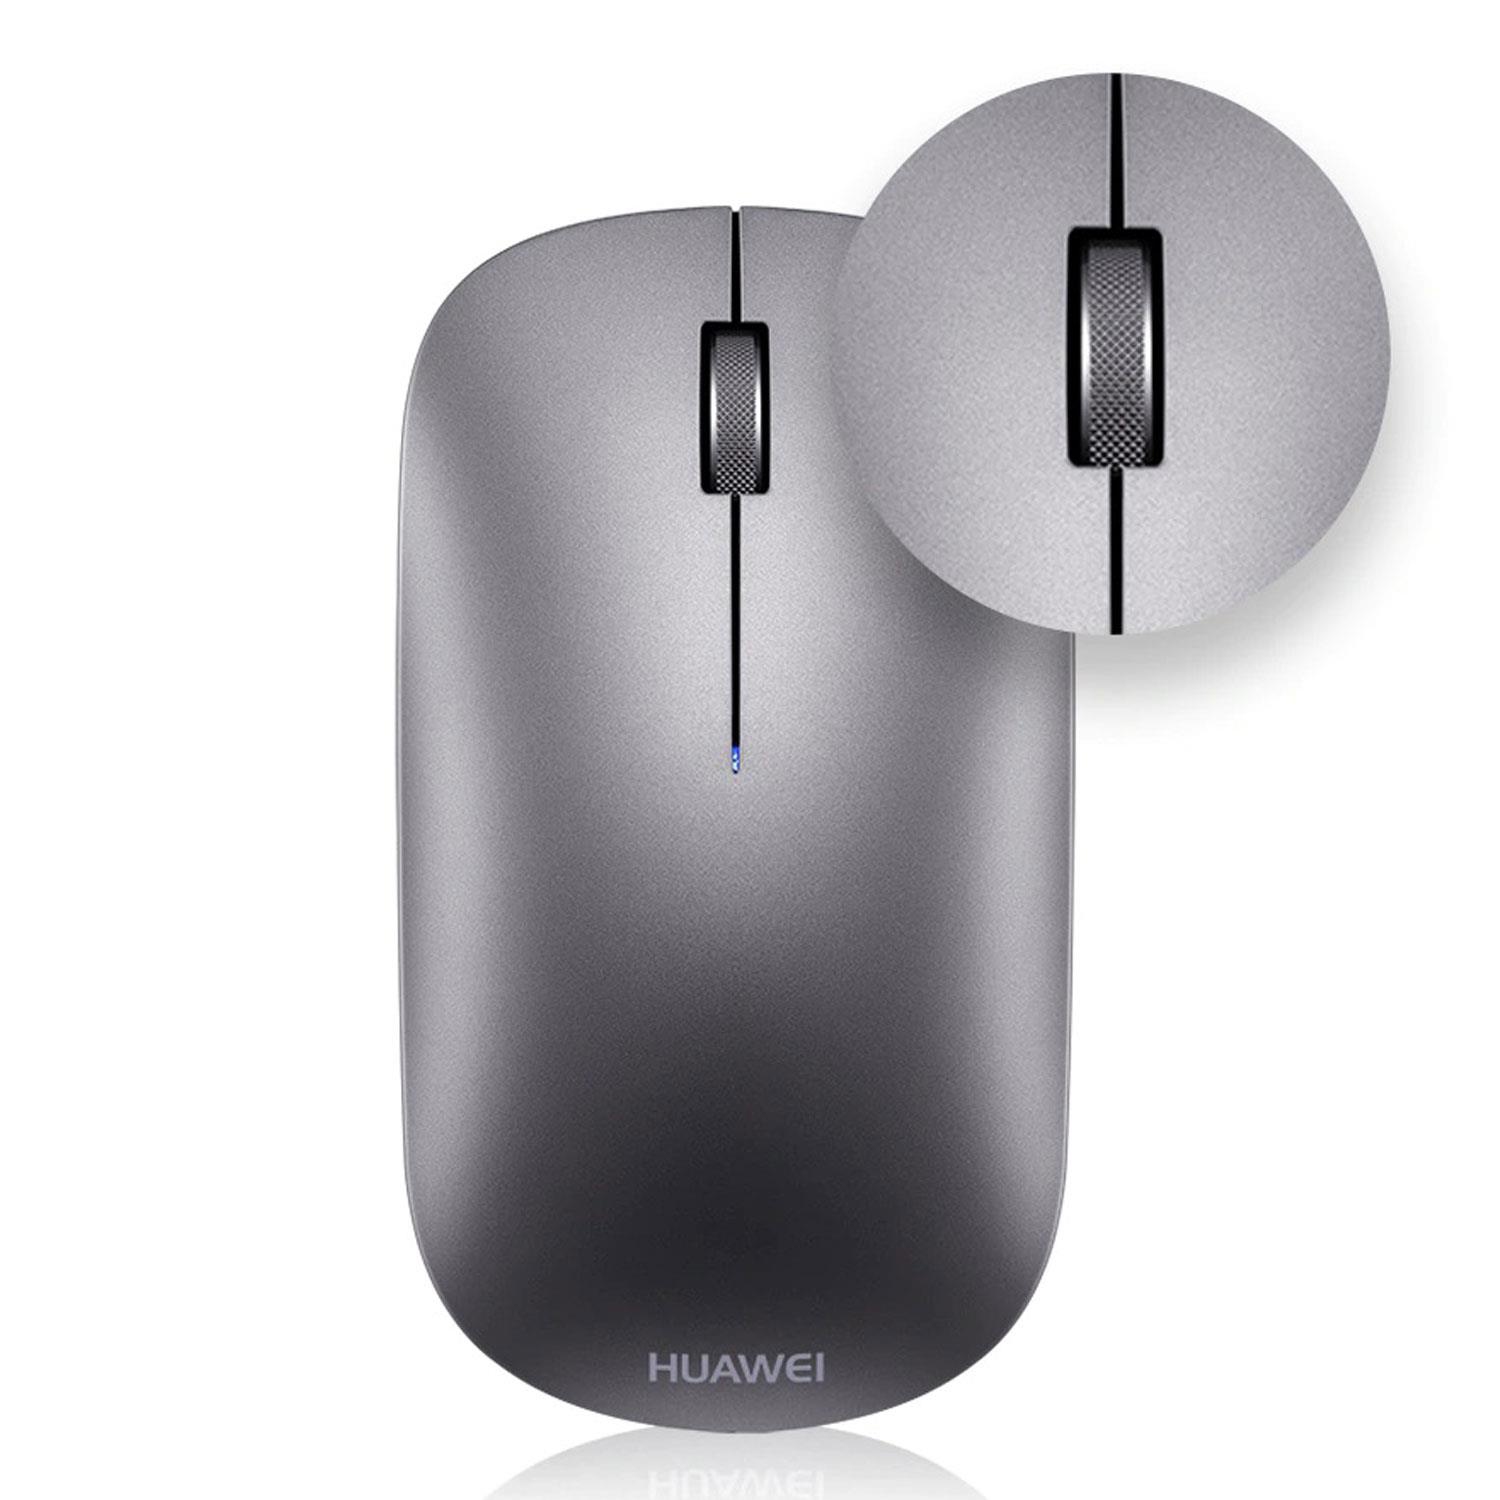 HUAWEI Bluetooth Mouse (2nd gen), Bluetooth 5.0/LE, Win 10/8.1, macOS 10.10, iOS 13.1, HarmonyOS 2.0 or Later, Android 5.0 or Later, Linux, AA Battery, 1200/4200 DPI, Space Gray